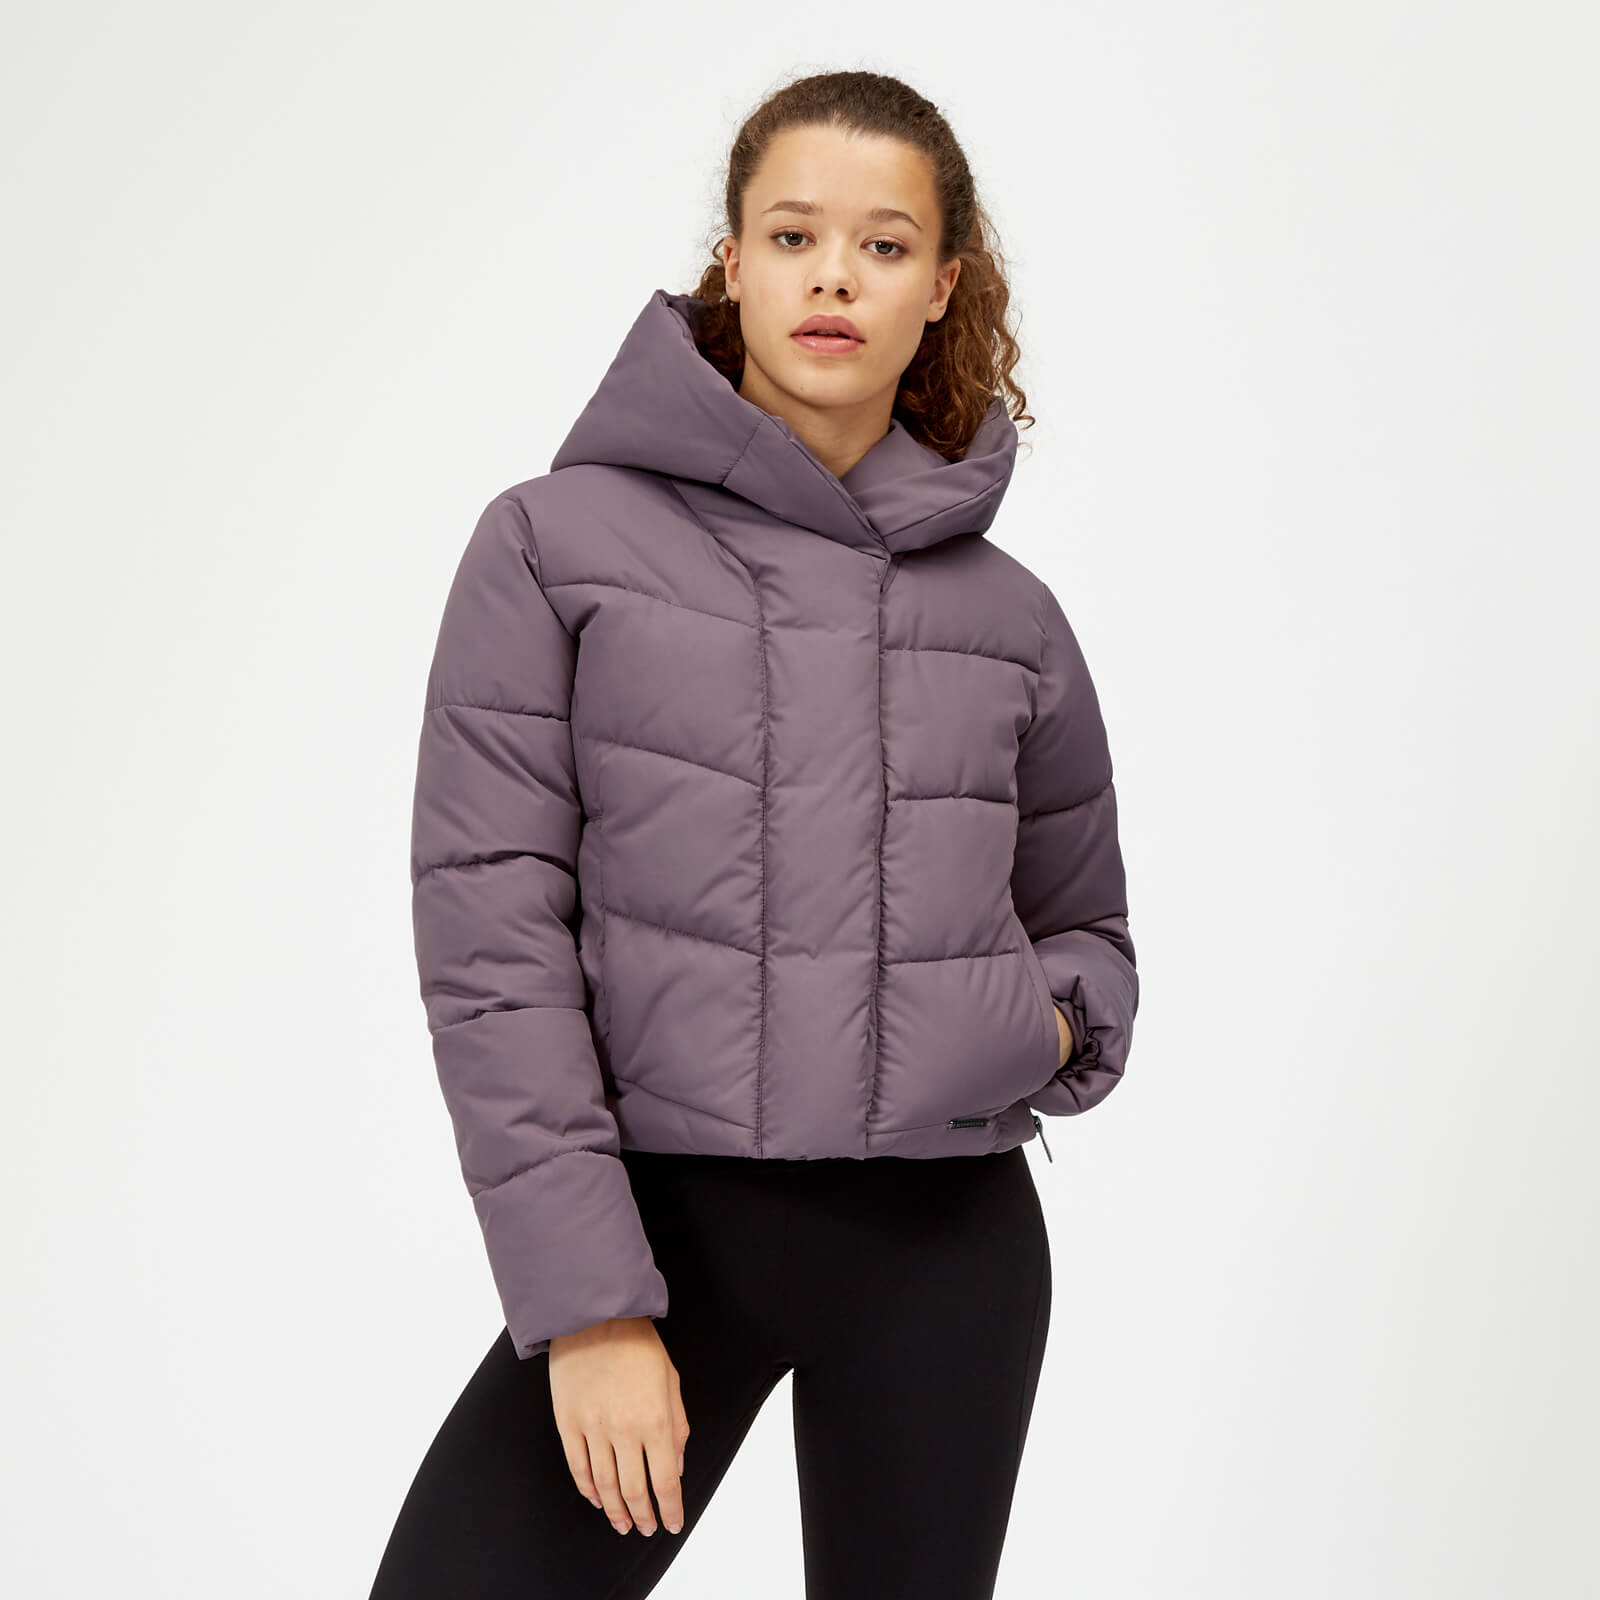 Myprotein Pro Tech Protect Puffer Jacket - Mauve - L